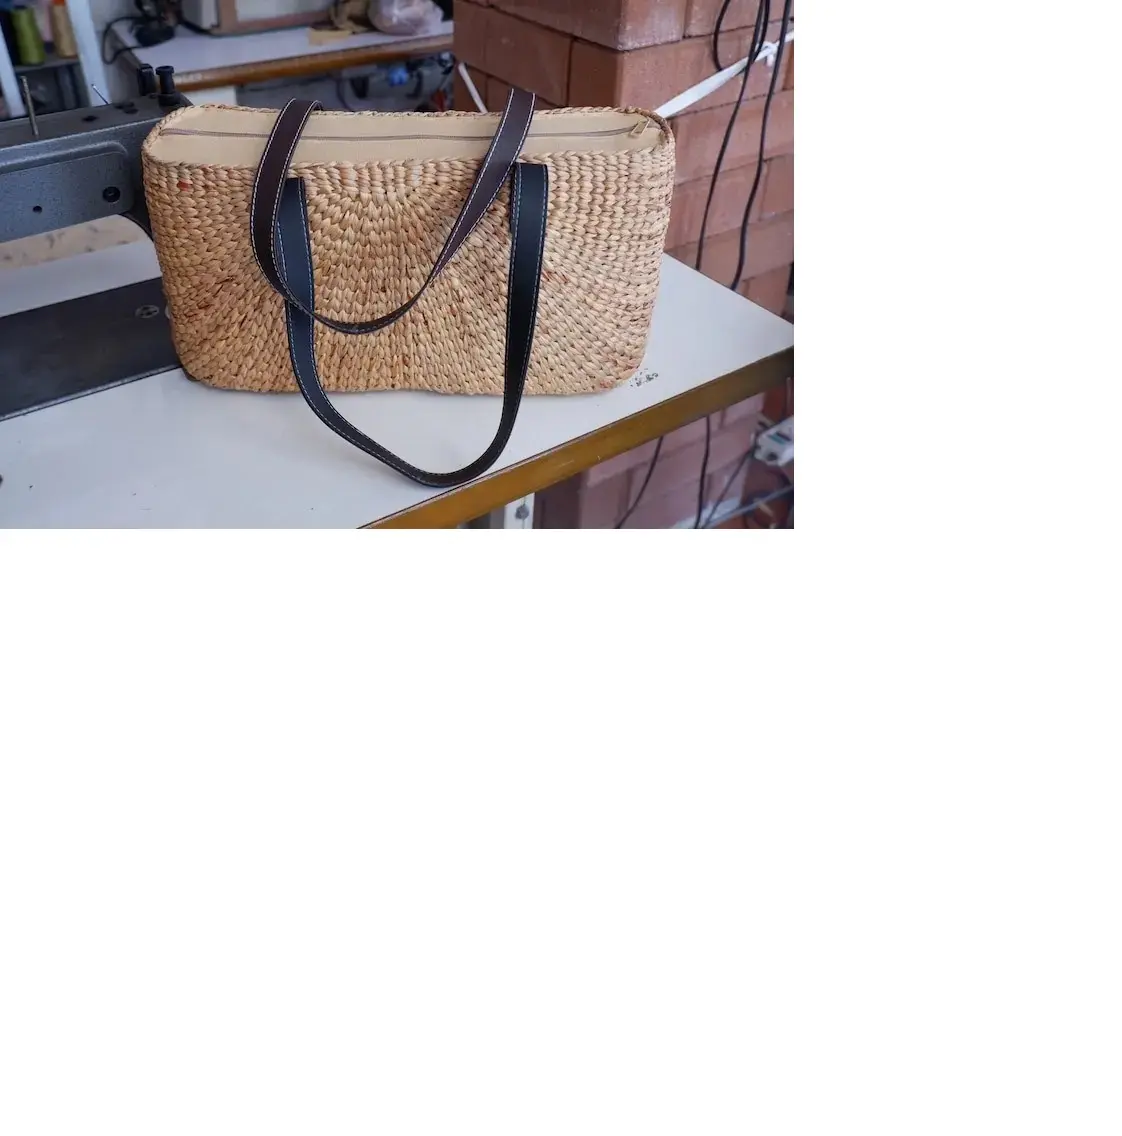 High quality Large fashion basket bag with zipper can hold many items and handicrafts made in Viet Nam